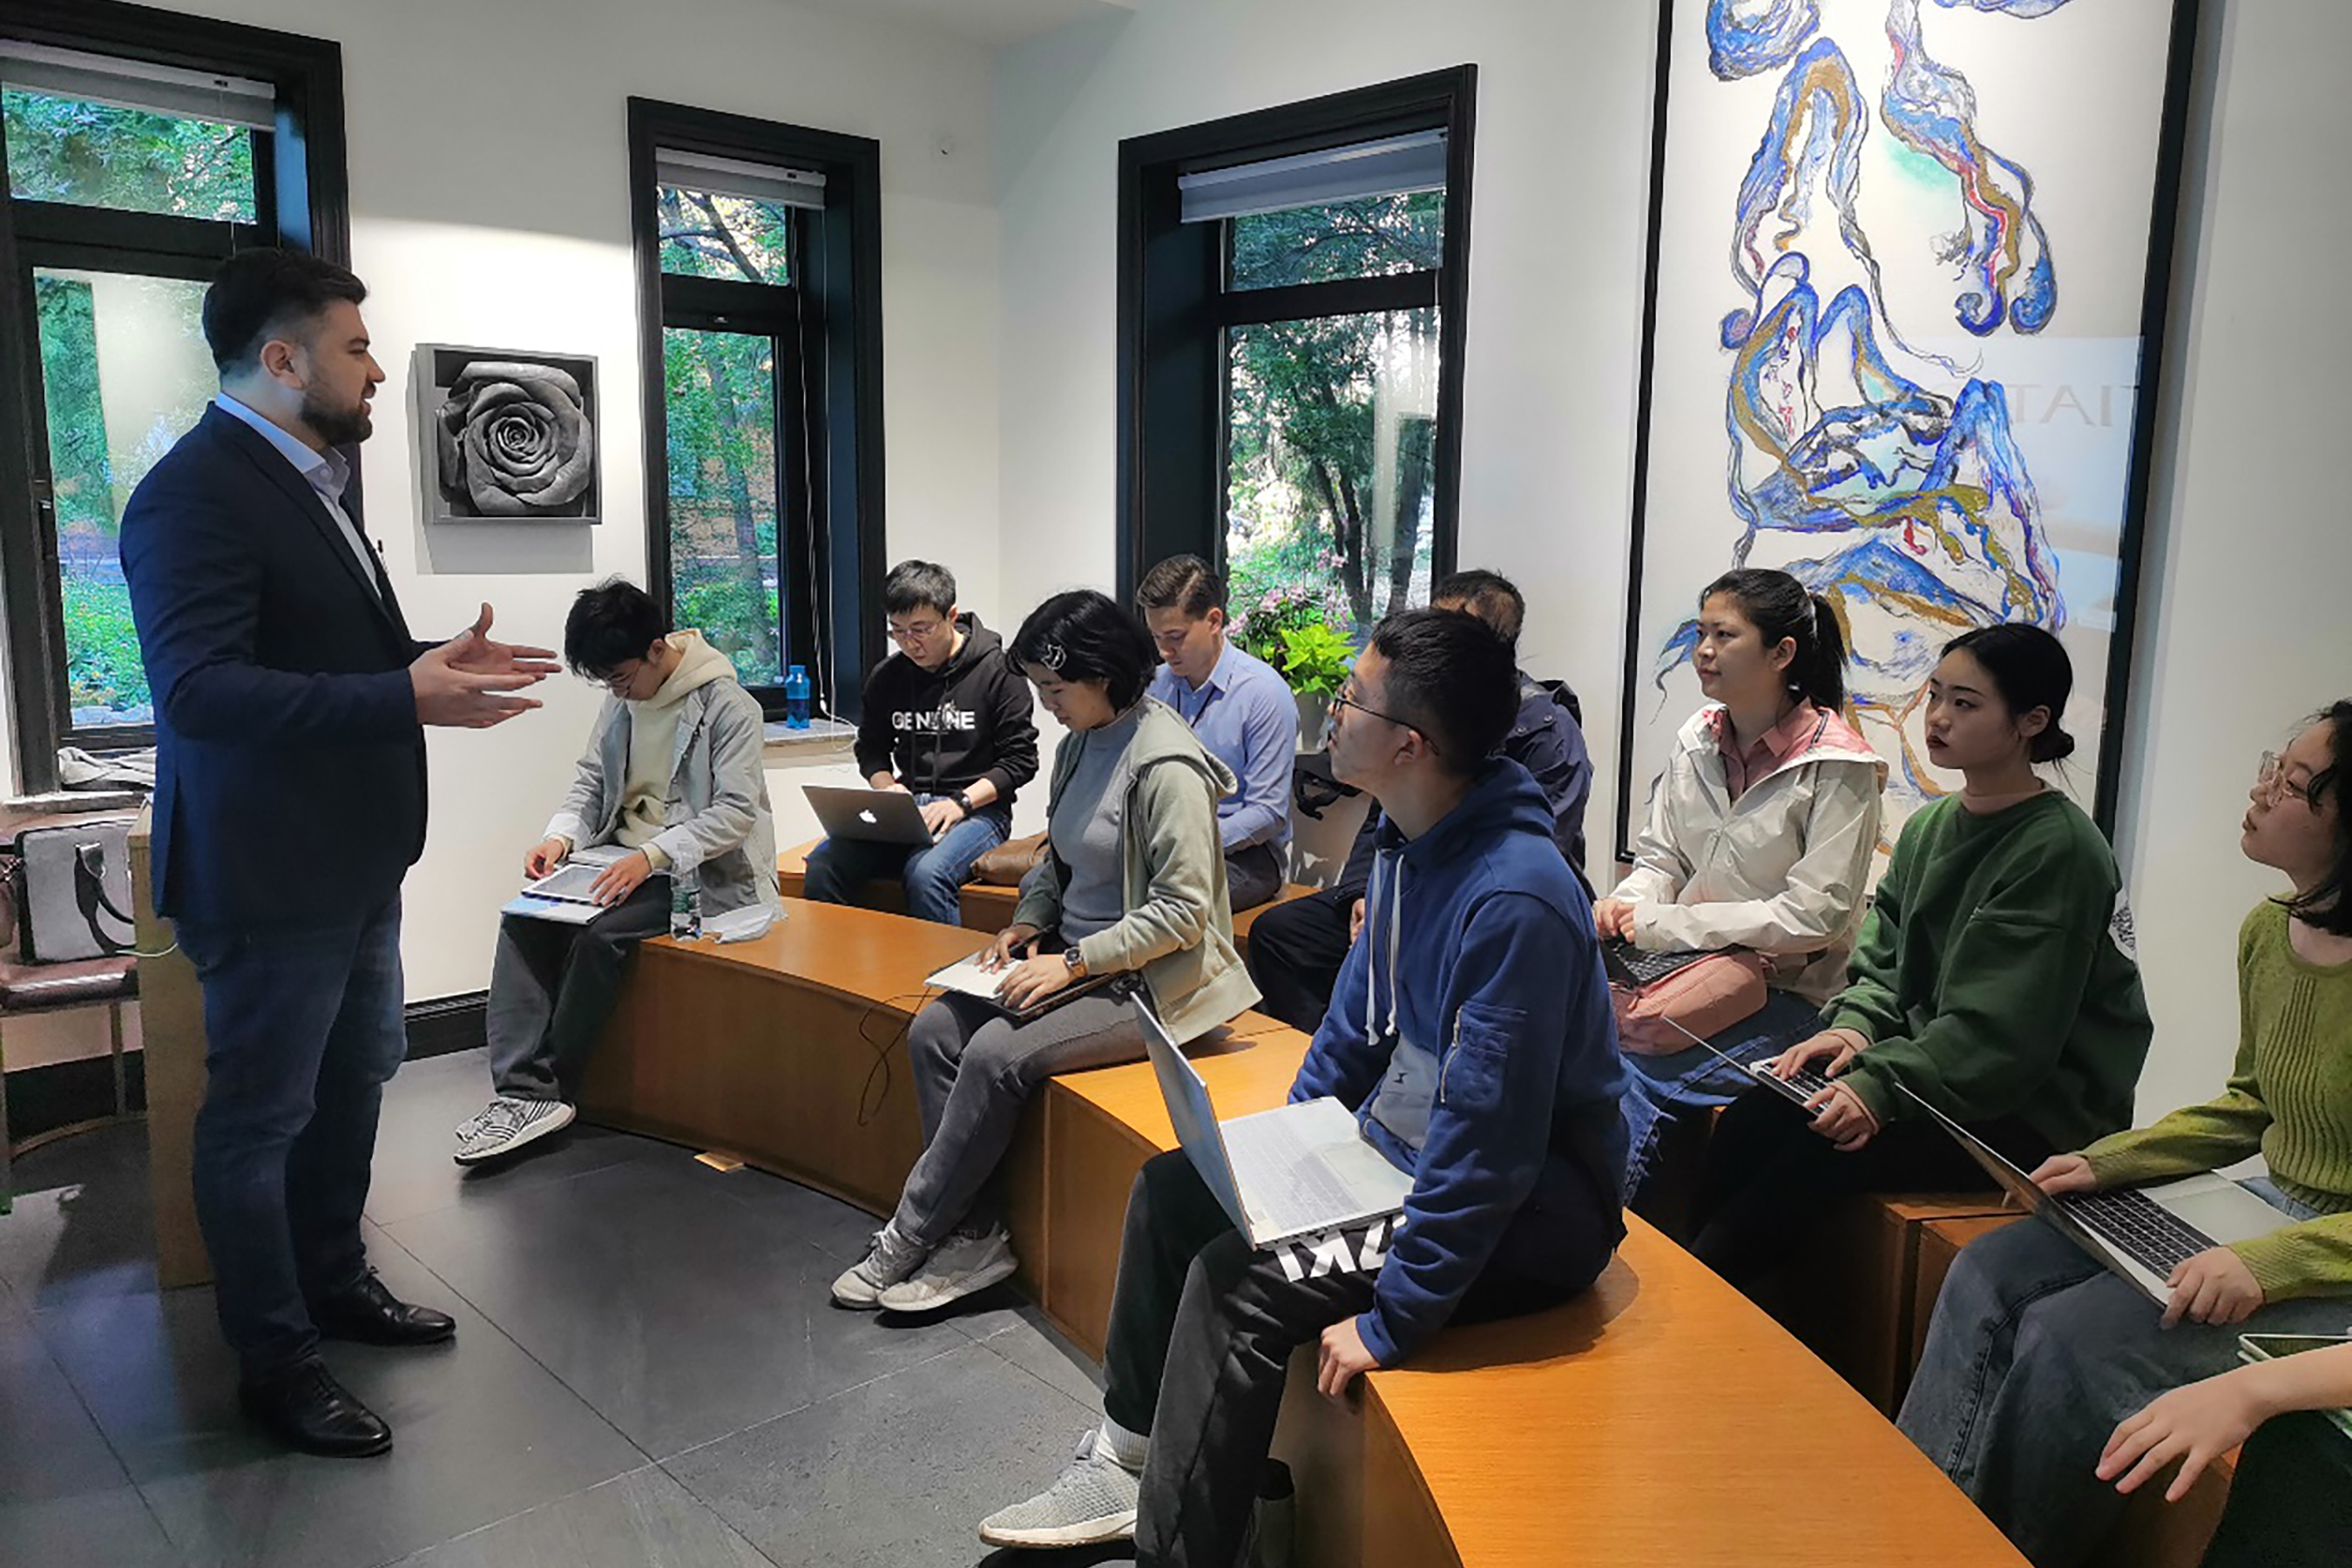 A lecturer passionately teaching a group of attentive students at Tsinghua University.